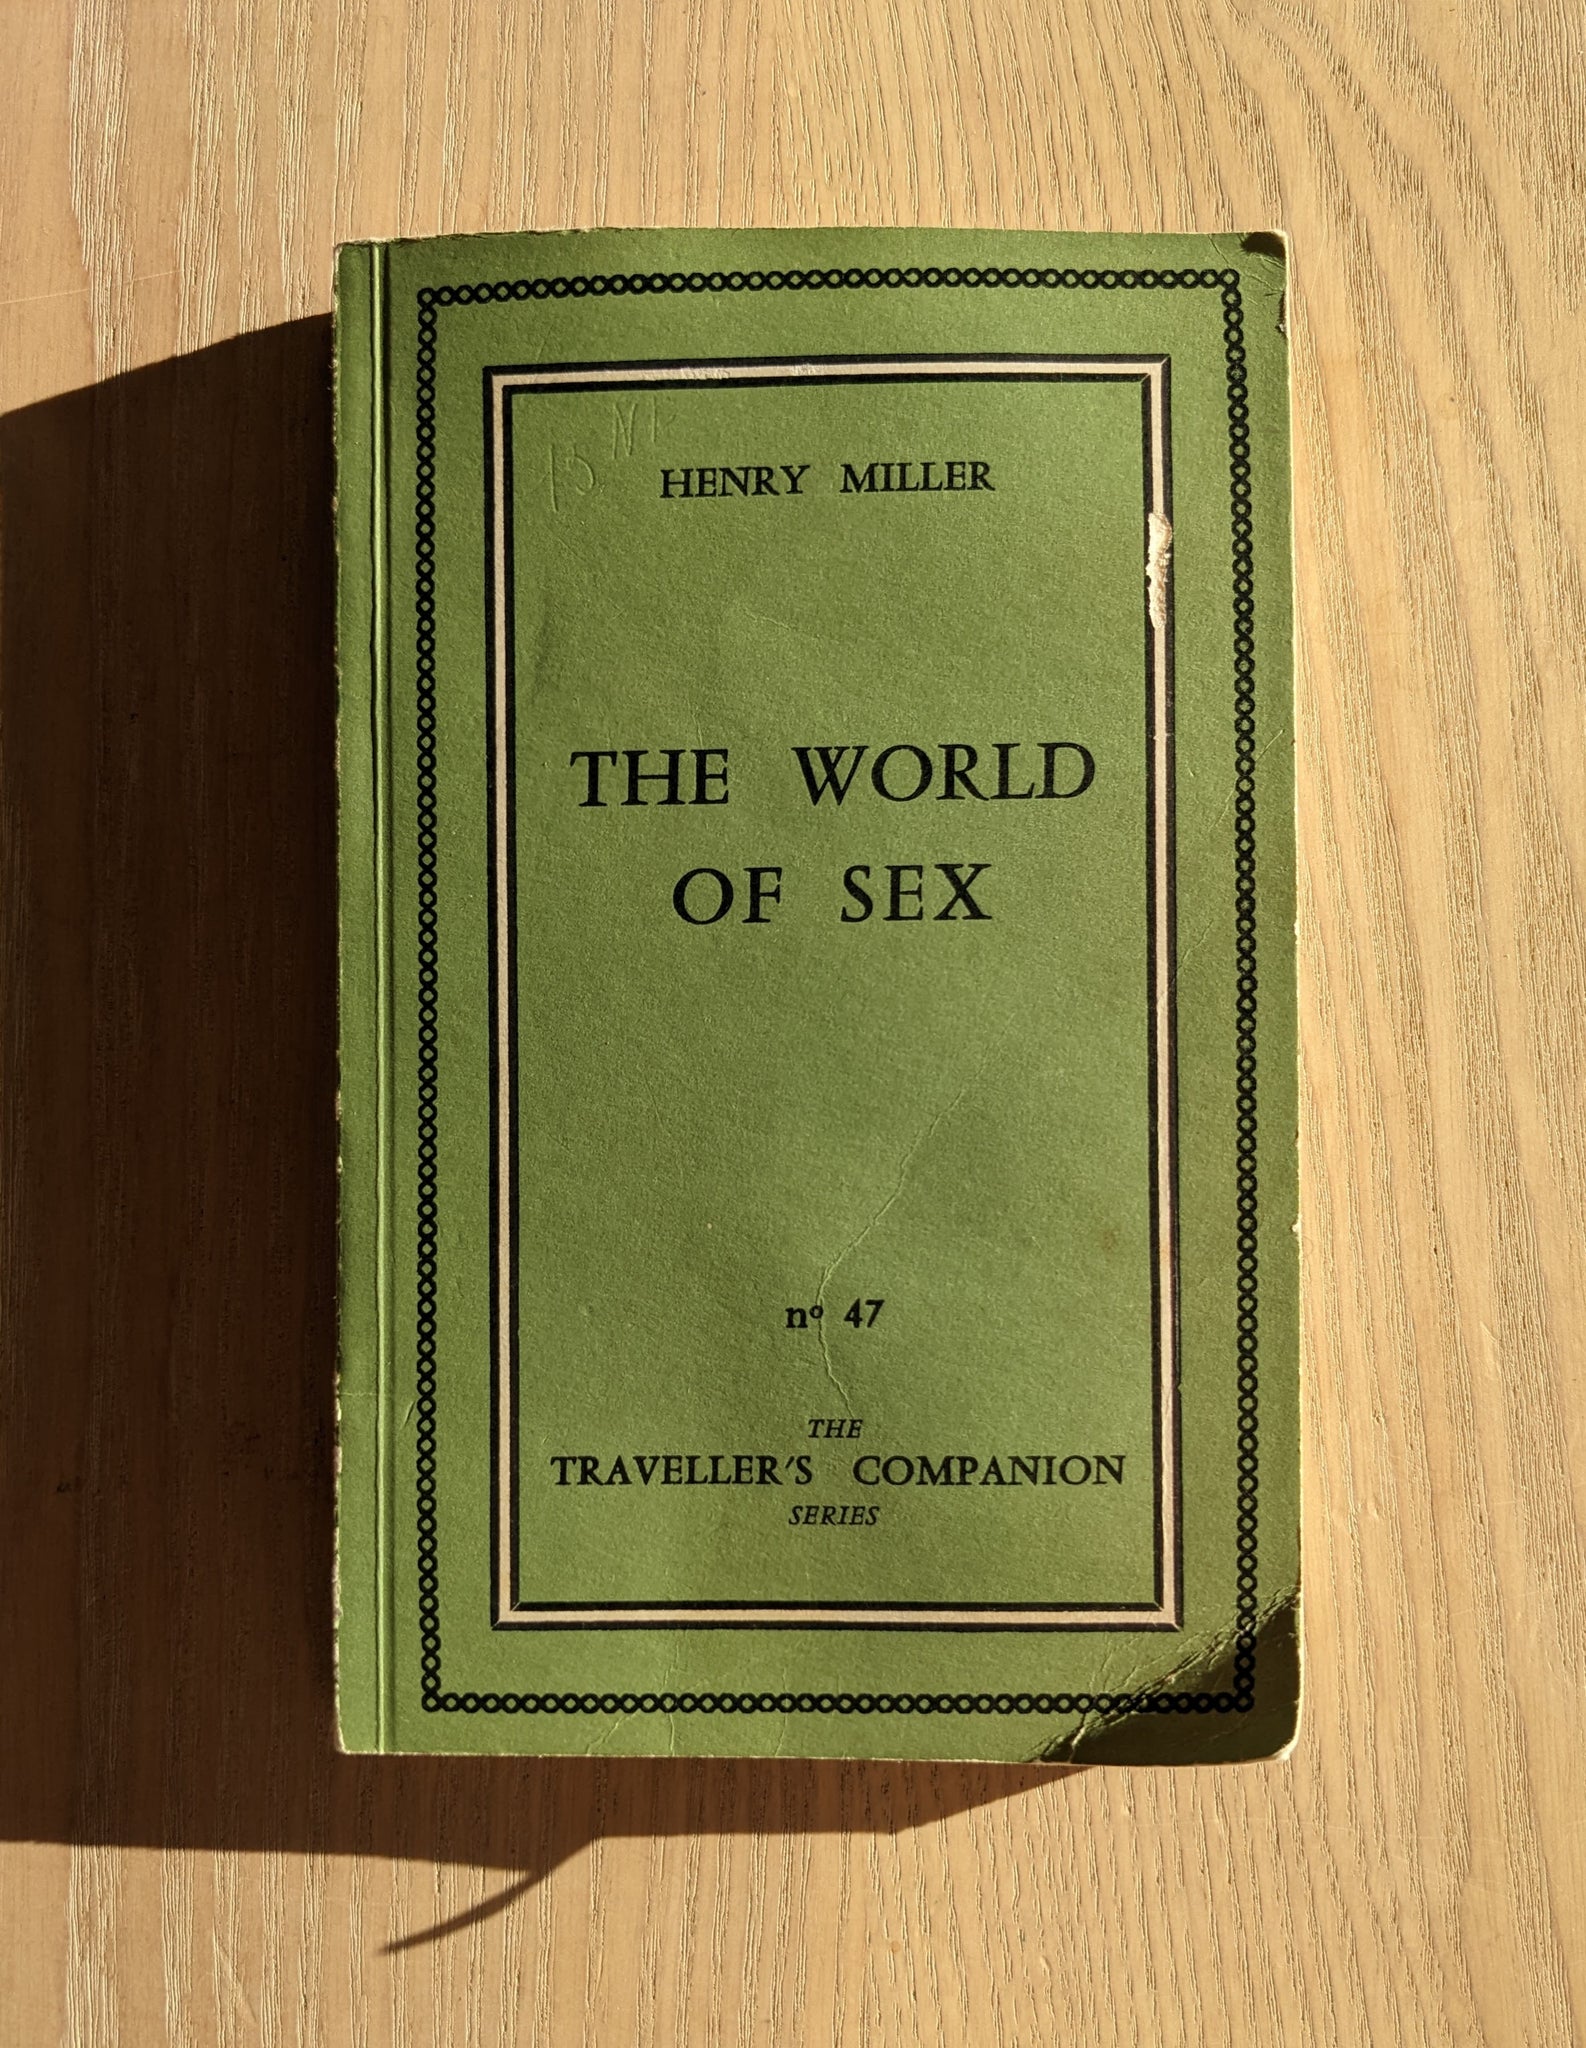 The World of Sex (The Traveller's Companion Series #47) 1959 Book